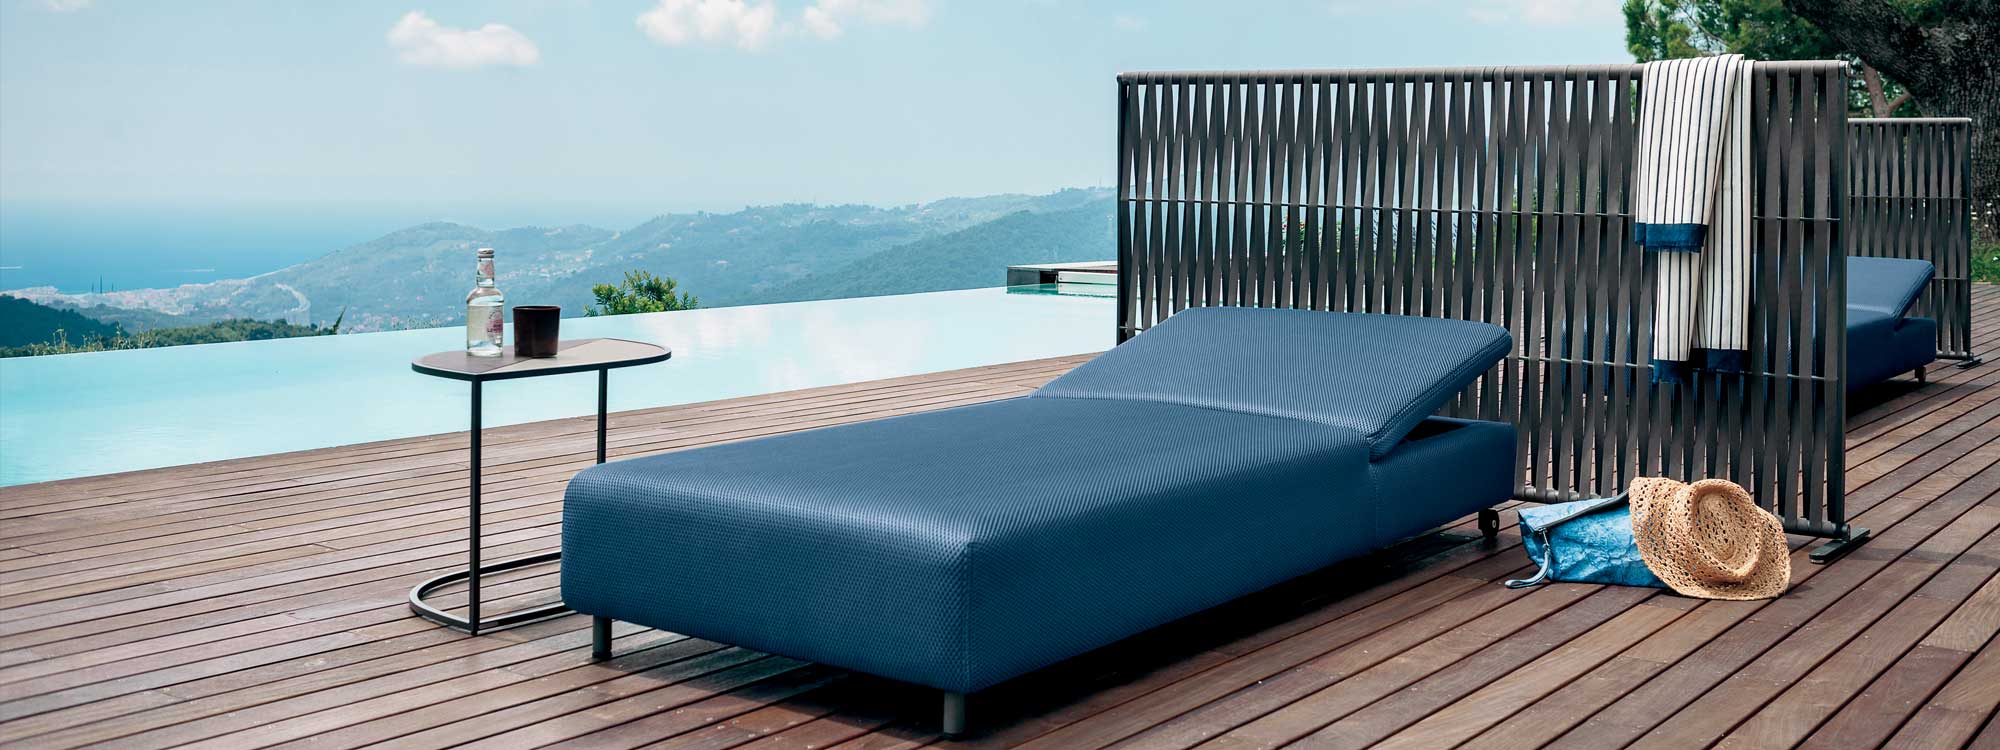 Image of Double minimalist sun lounger upholstered in blue 3d fabric, with Wing outdoor screen and horizon swimming pool in the background